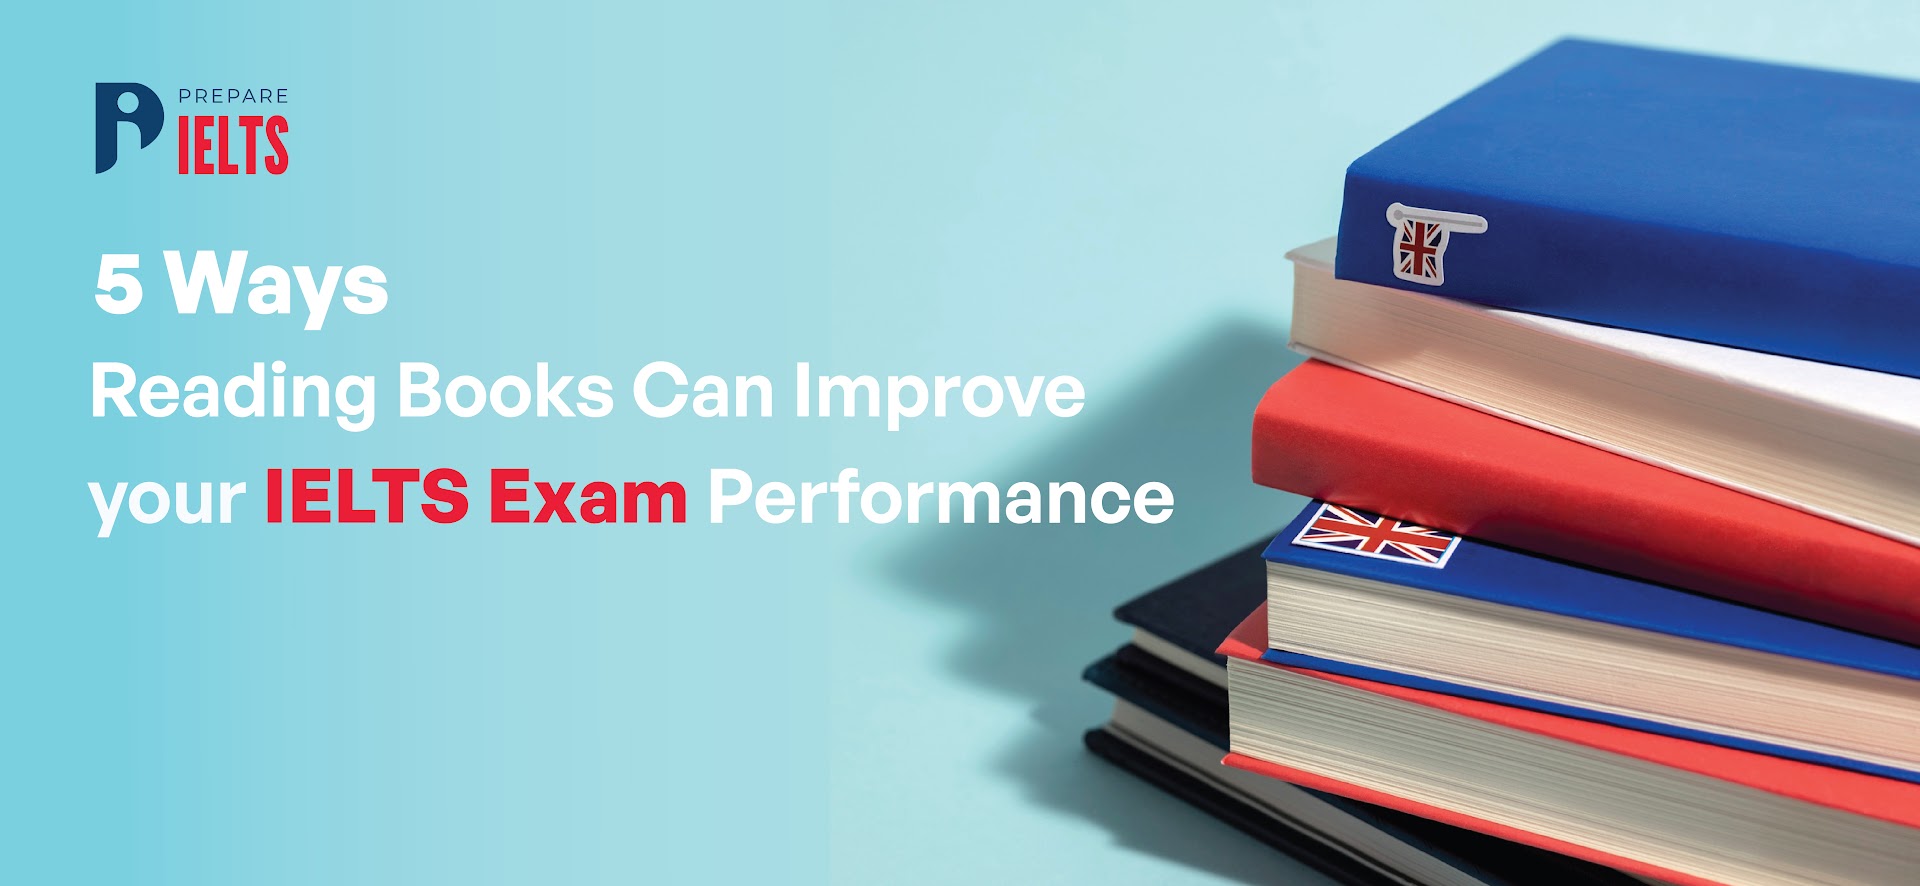 5 Ways Reading Books Can Improve Your IELTS Exam Performance